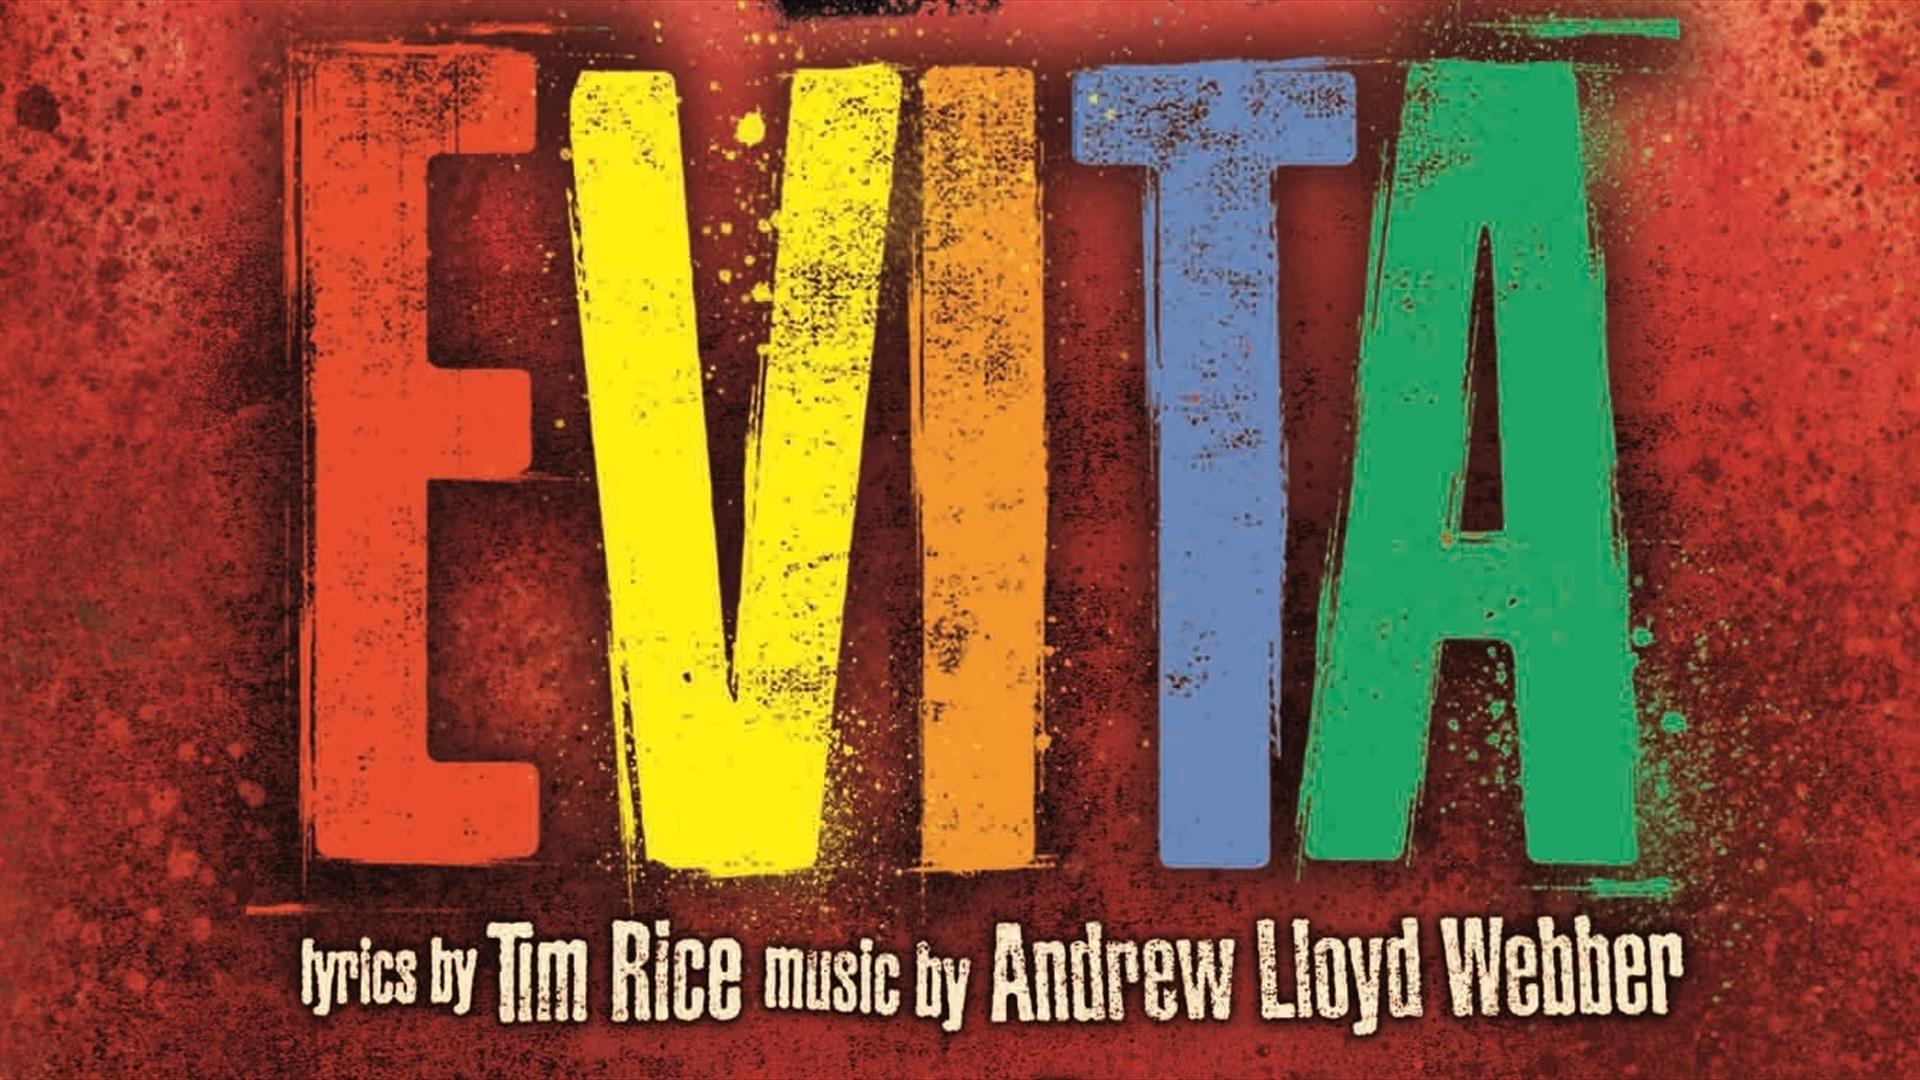 Image is of poster of Evita the musical